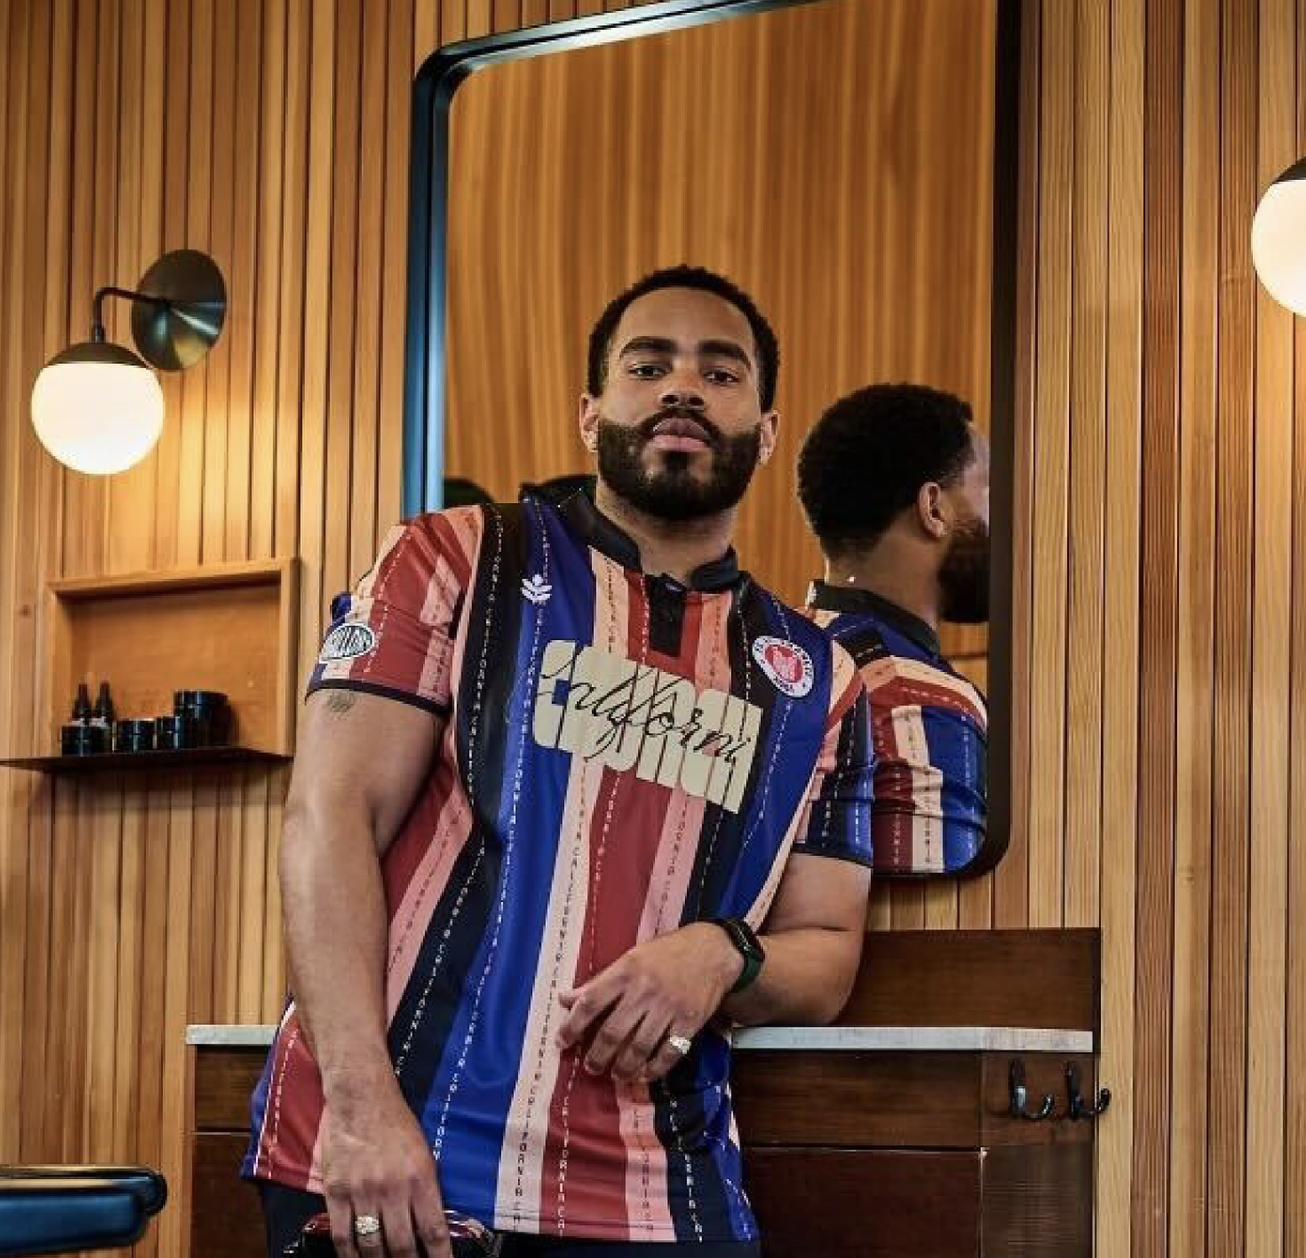 A Black man wearing a vertically striped shirt leans against a barber station with a mirror behind him.